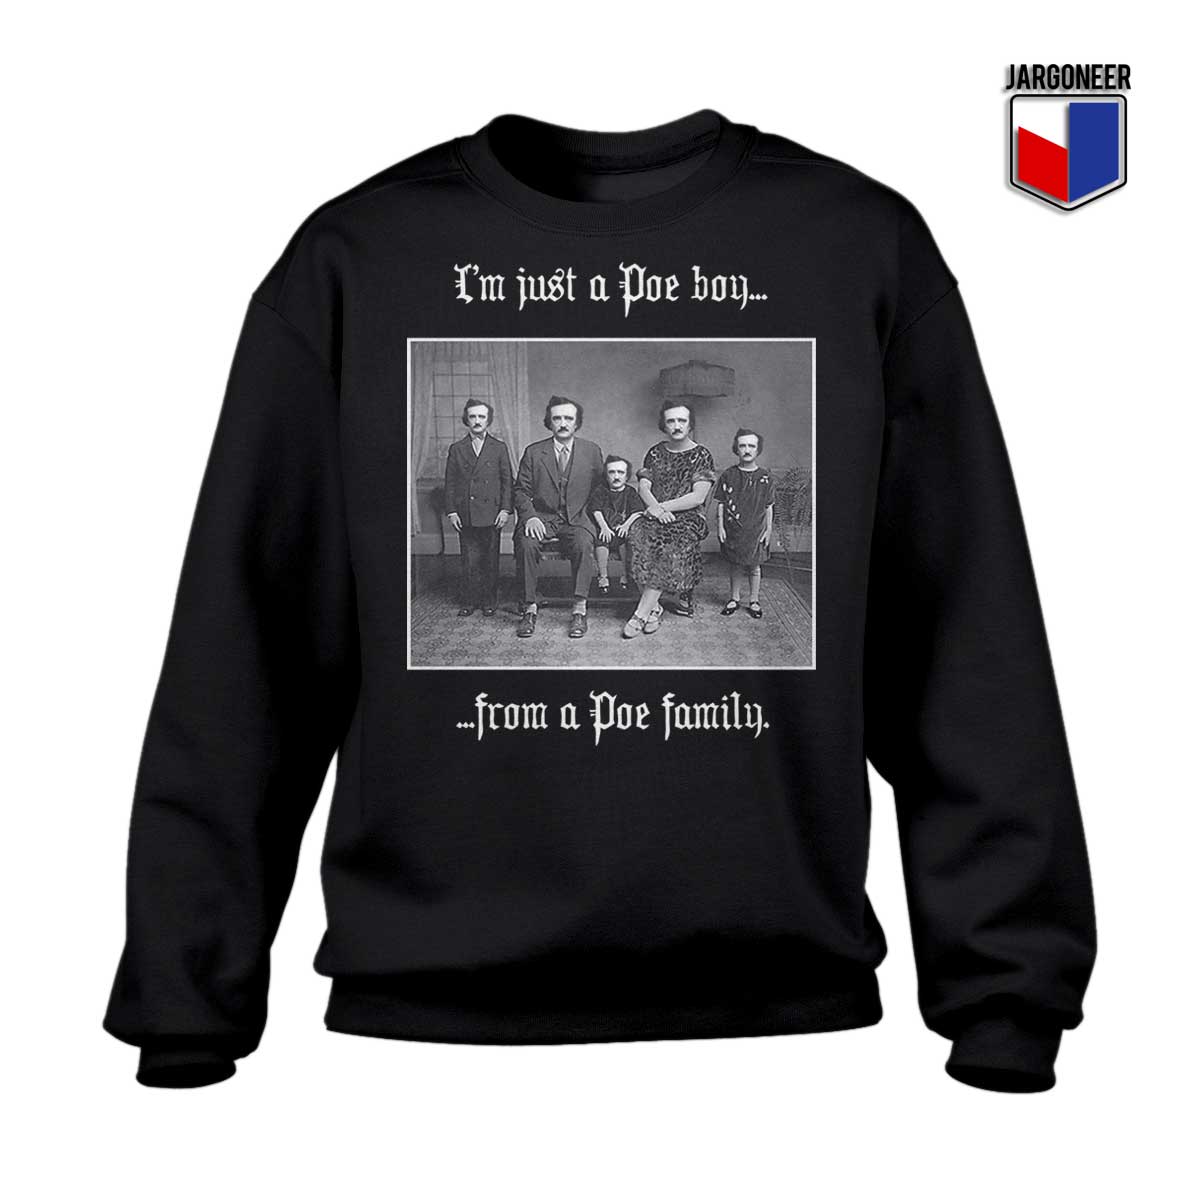 Im Just A Poe Boy From a Poe Family Sweatshirt - Shop Unique Graphic Cool Shirt Designs